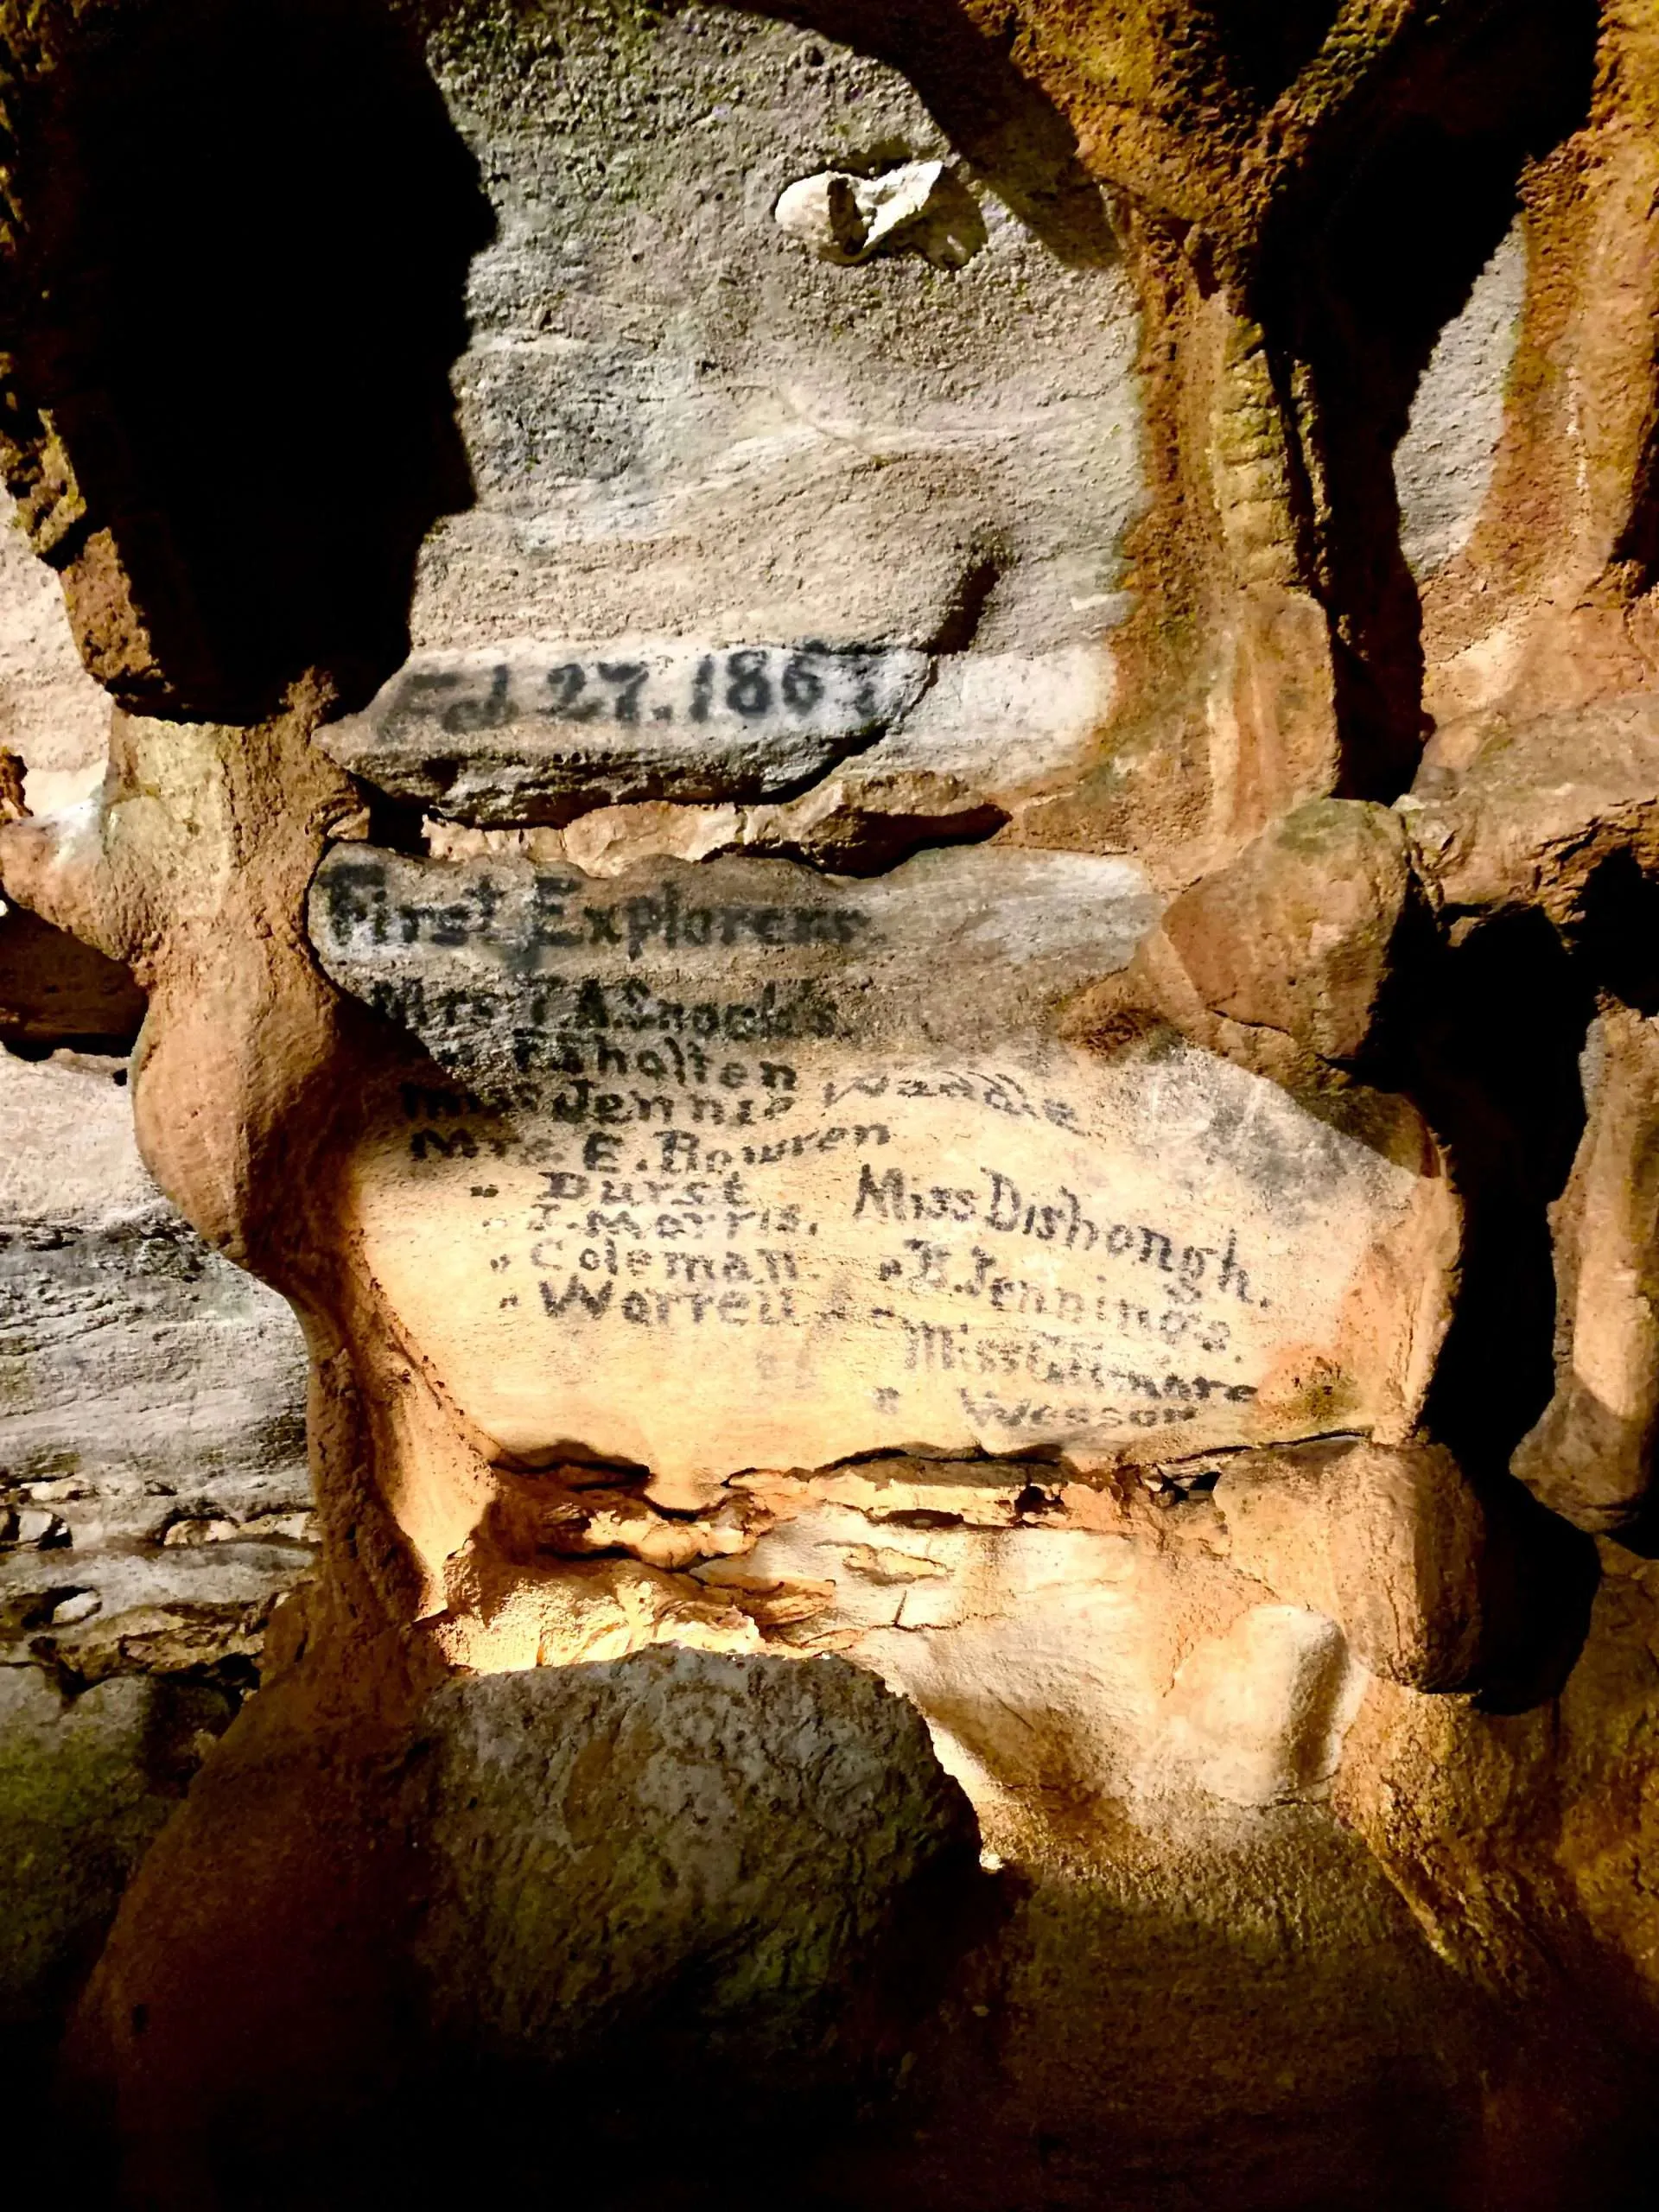 names of the explorers of Fantastic Caverns written on the cave wall